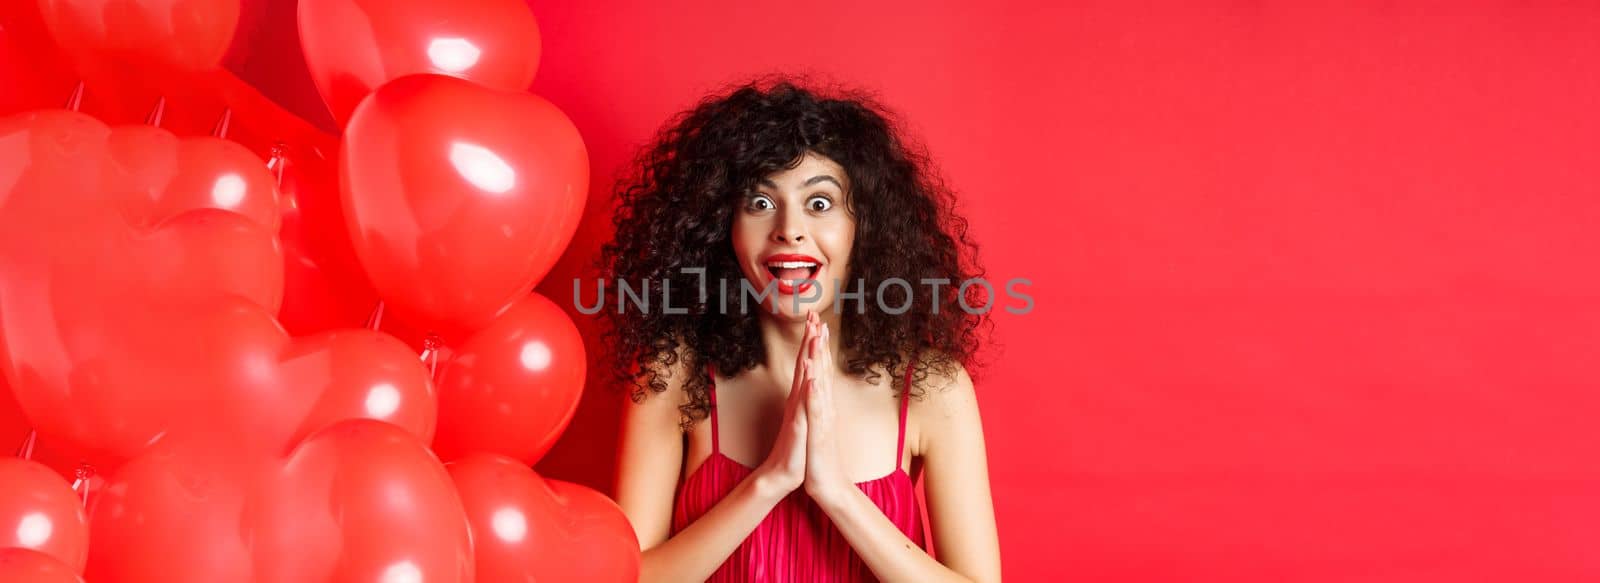 Valentines day. Excited caucasian woman in dress jumping from amazement, looking at something taunting, want to get product, standing near hearts balloons, white background.